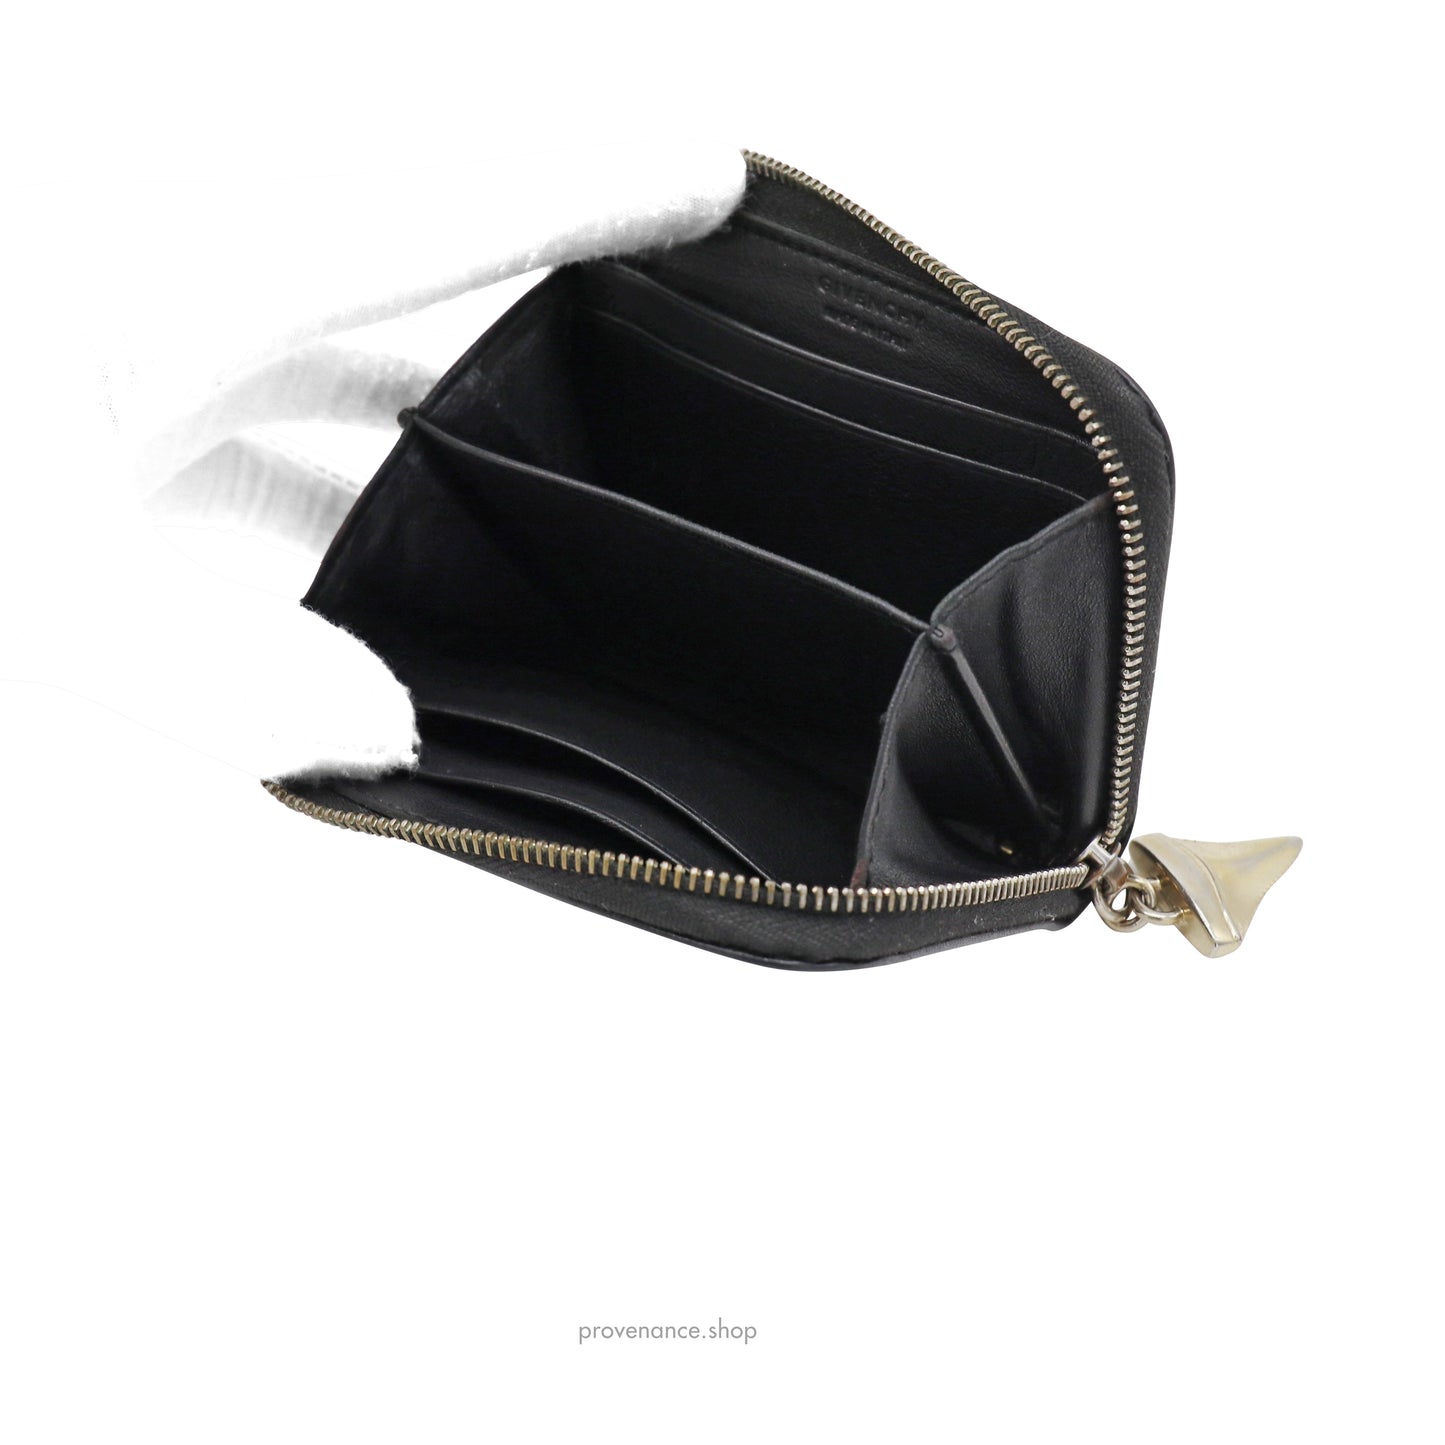 Givenchy Shark Tooth Zip Wallet - Black